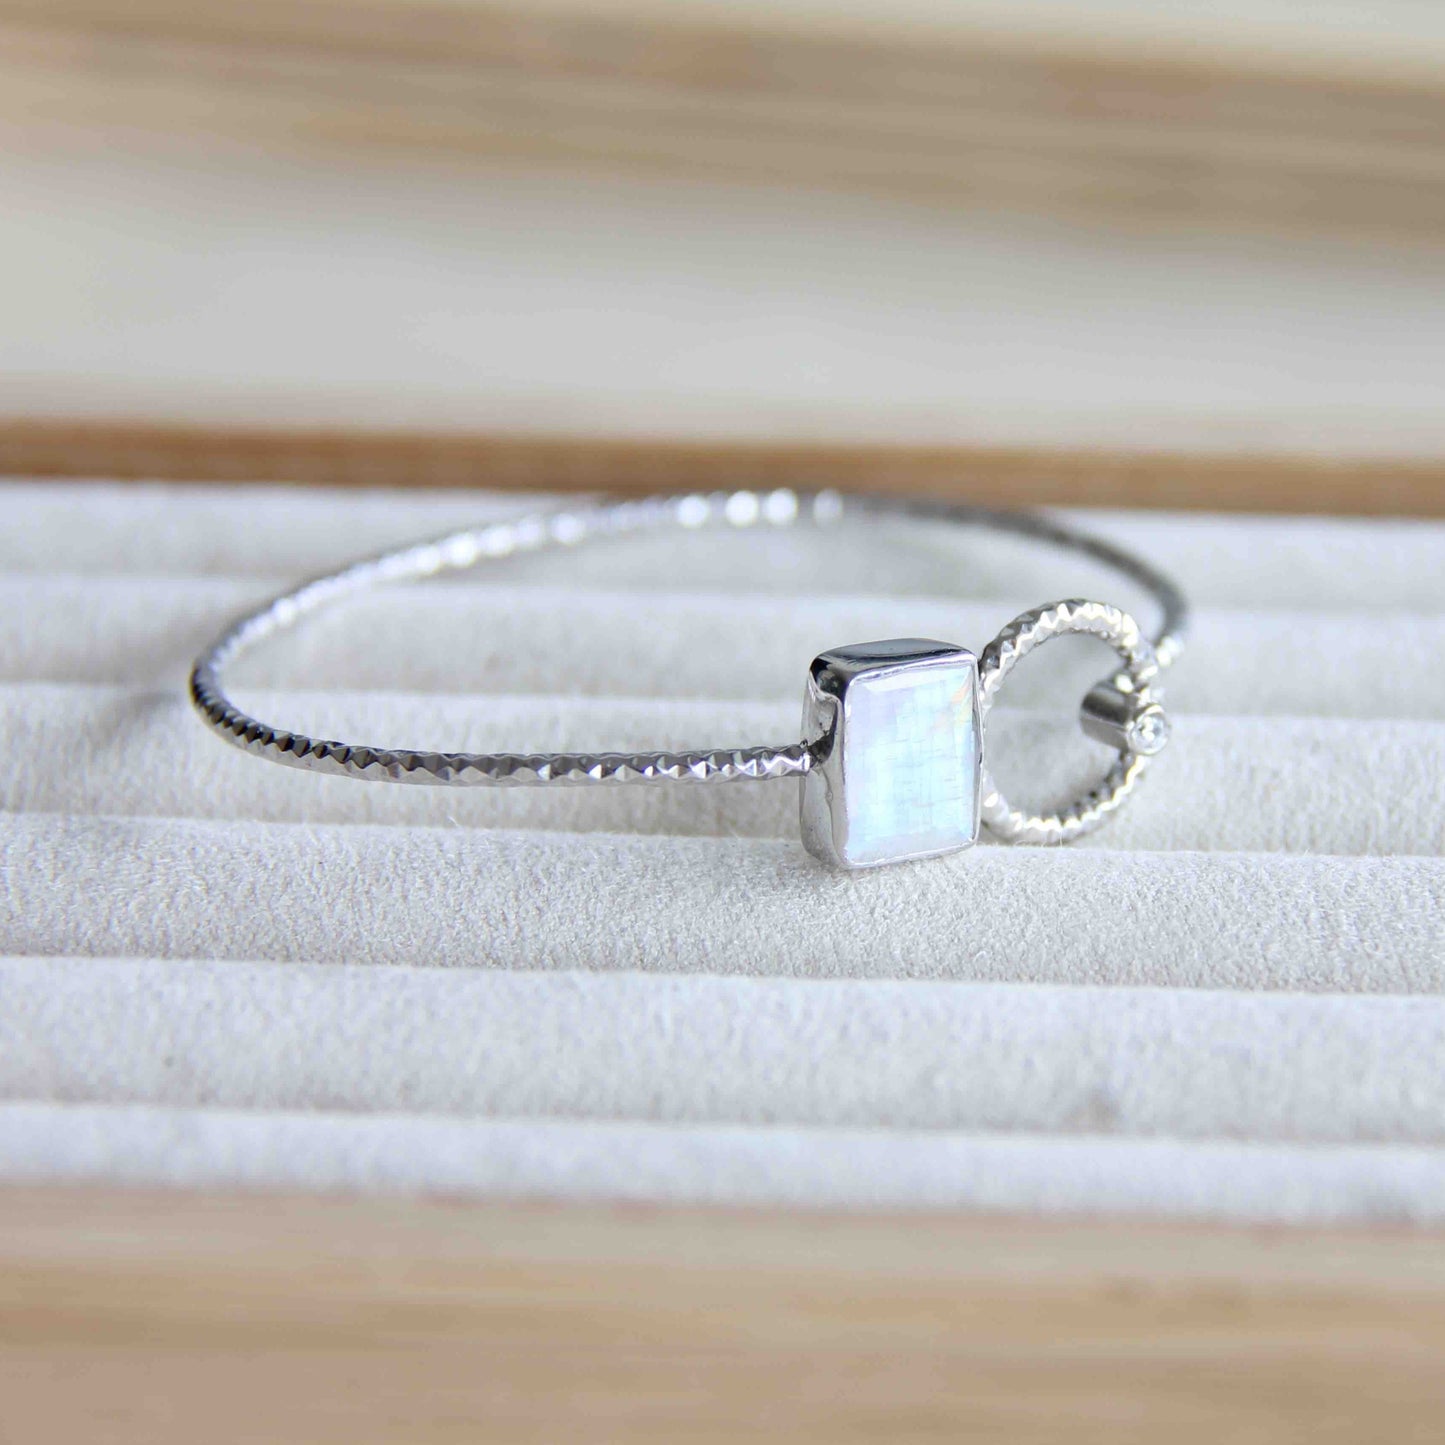 925 Sterling Silver Cuff Bracelet with Moonstone